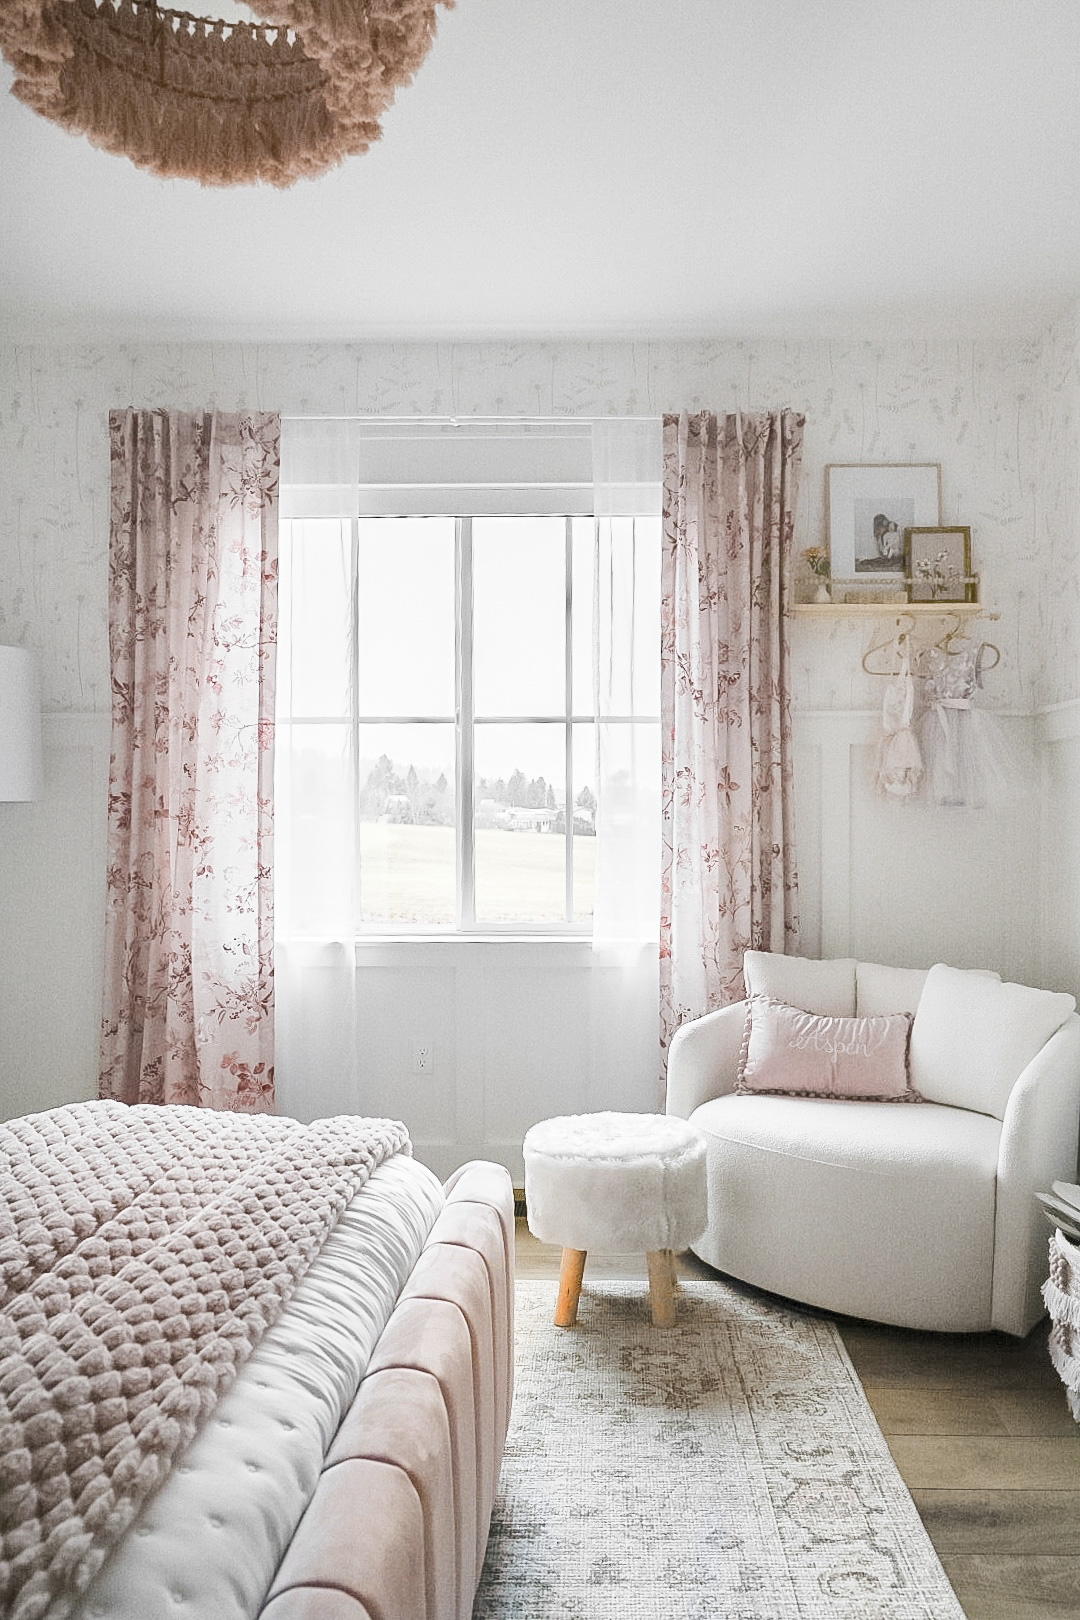 affordable home decor, girl's bedroom styling, girl's bedroom decor, bedroom, swivel chair, area rug, floral drapes, chunky knit blanket